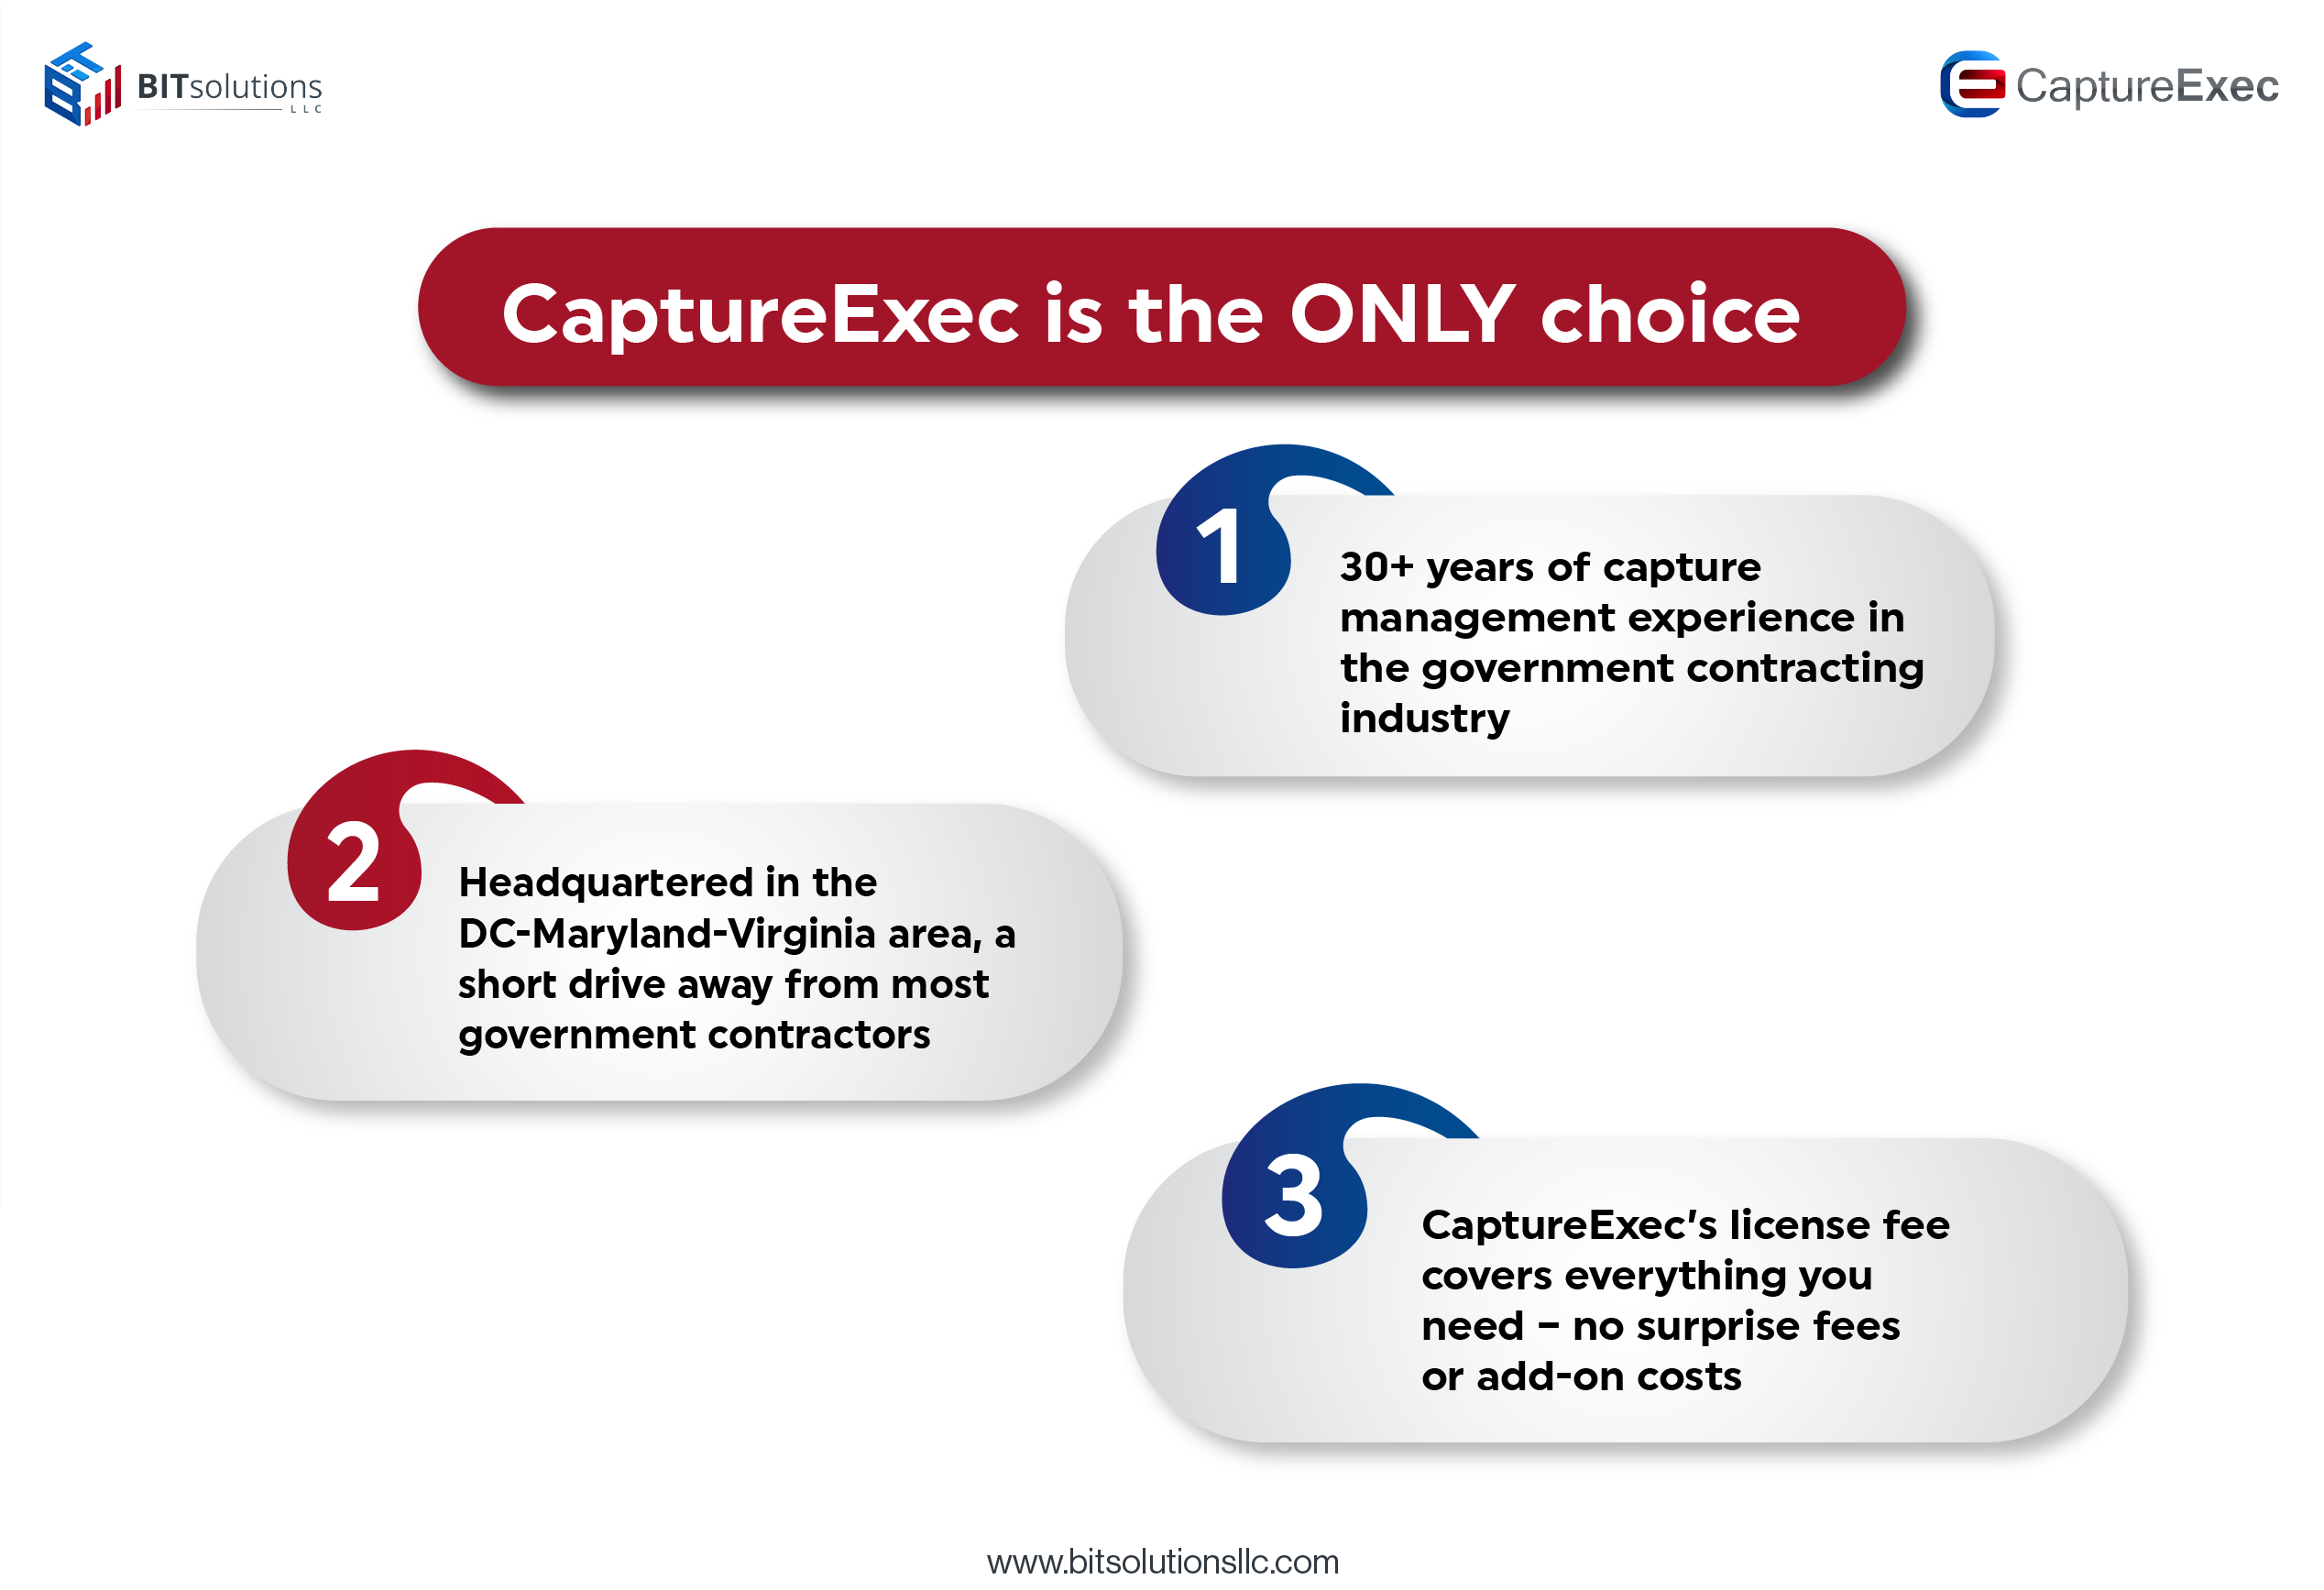 CaptureExec is the Only choice